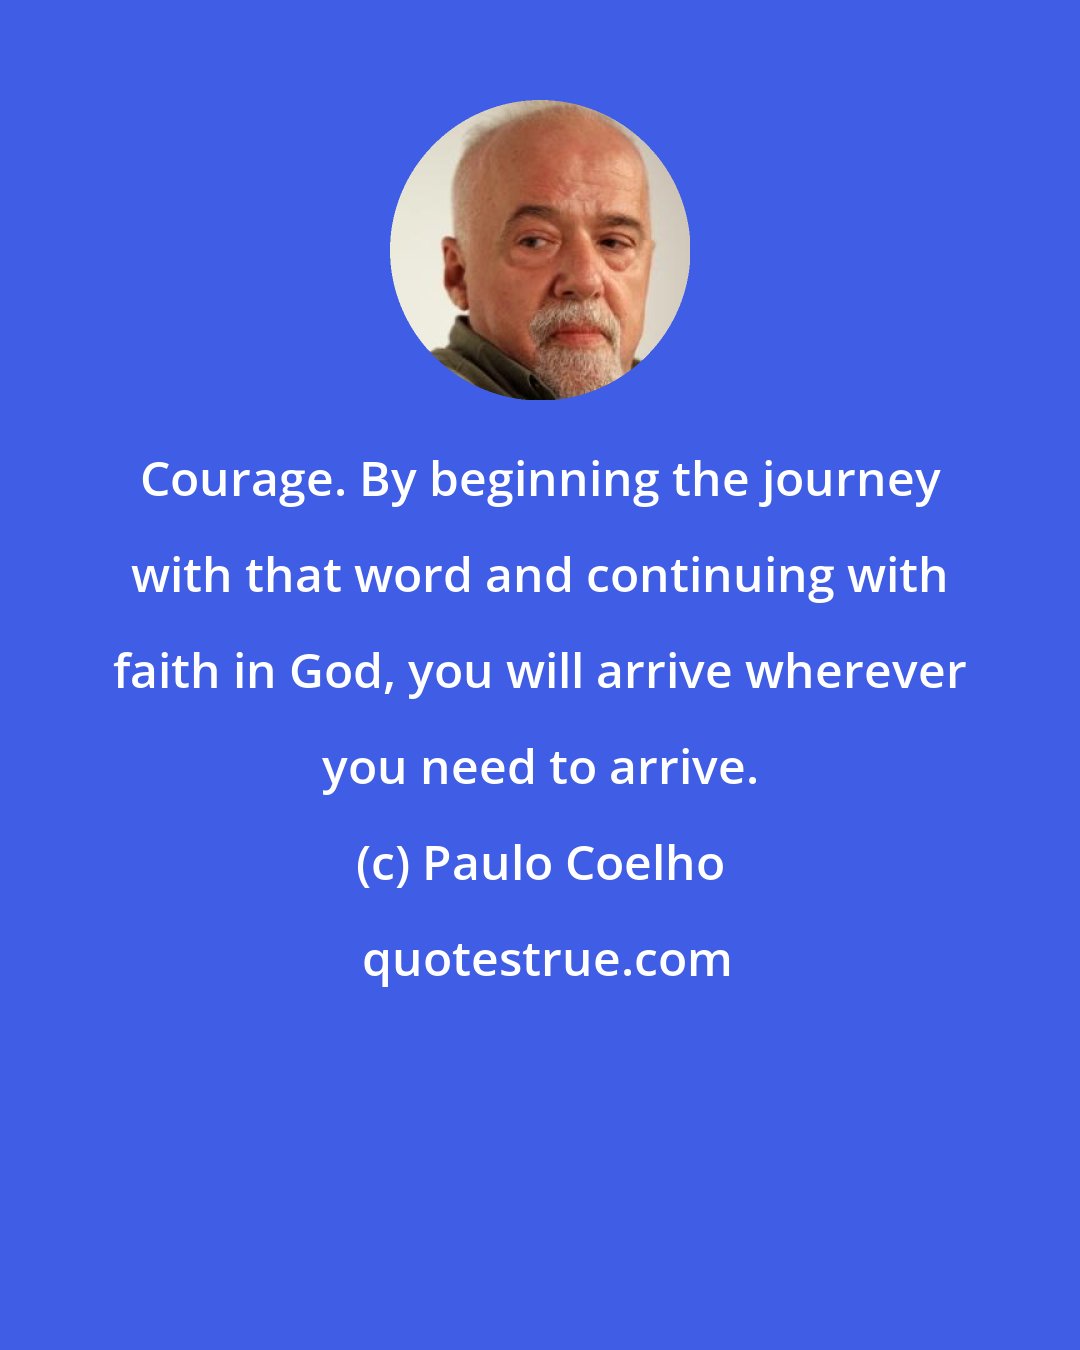 Paulo Coelho: Courage. By beginning the journey with that word and continuing with faith in God, you will arrive wherever you need to arrive.